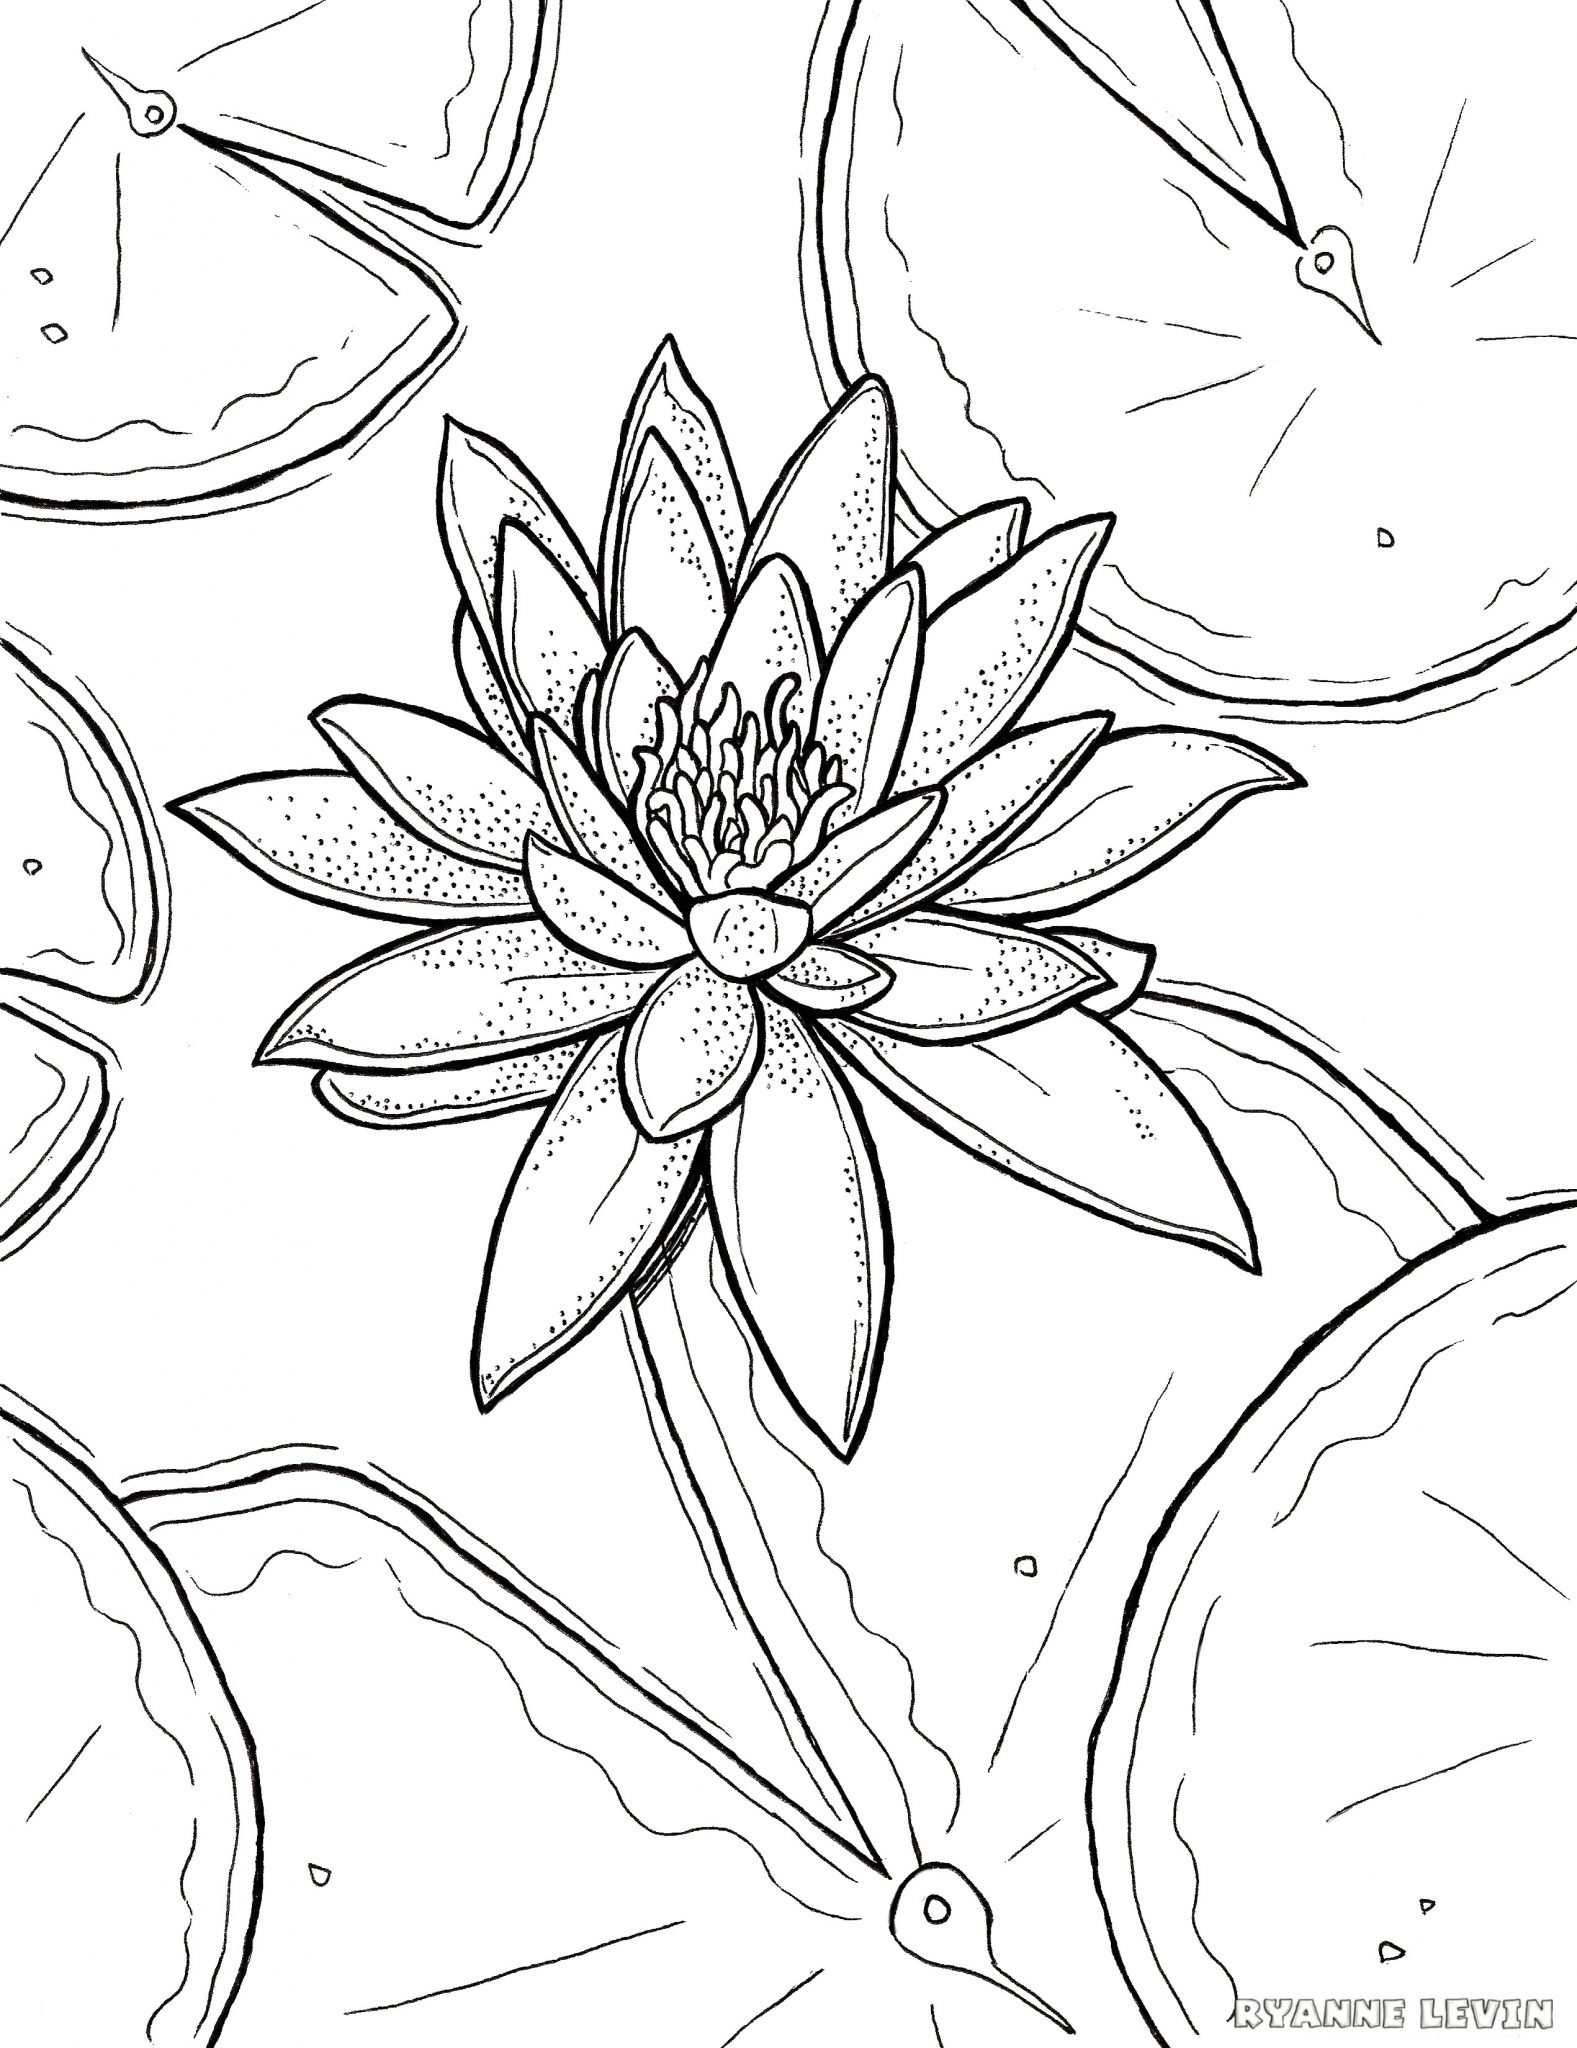 FREE Printable Water Lily Coloring Page Download – Ryanne Levin